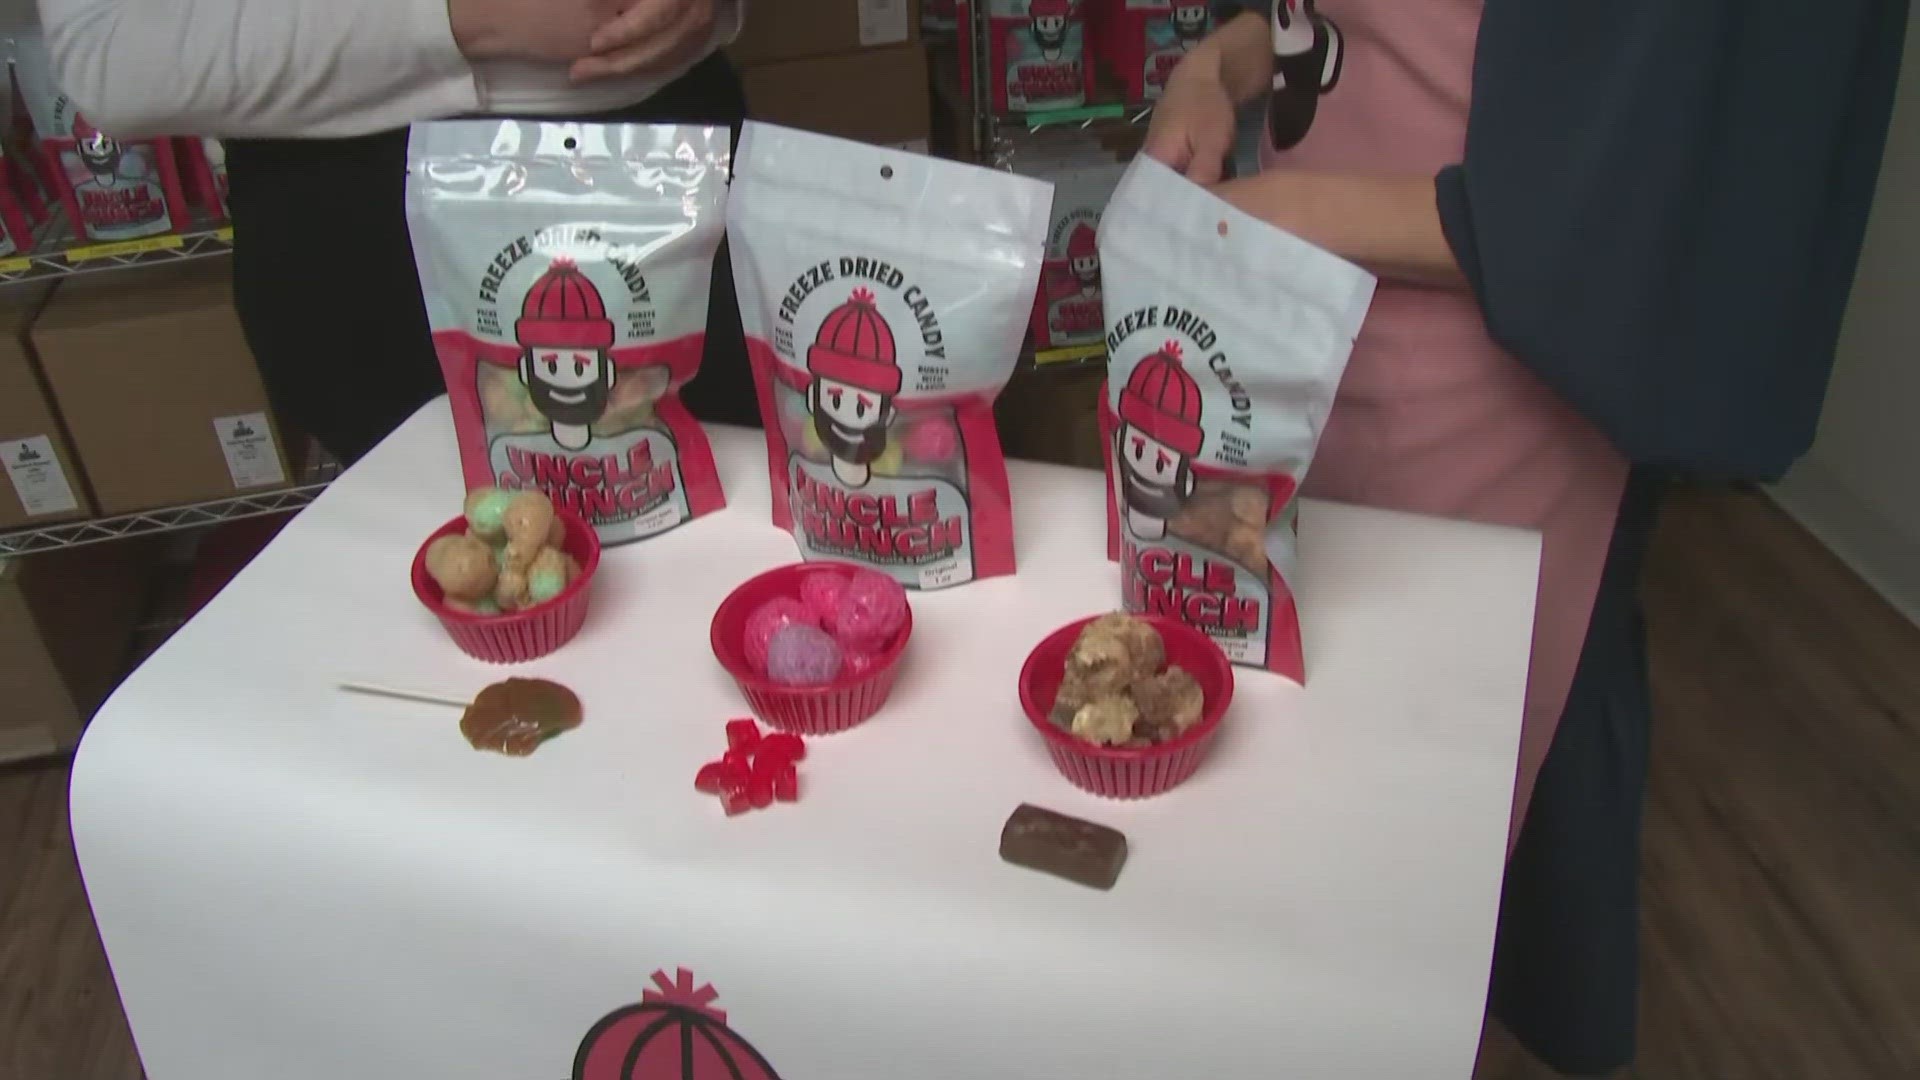 Air Heads and Nerd Rope are a few sweet treats so many of us grew up on.  Now, a local woman is putting a new twist on them with her freeze-dried candy business.